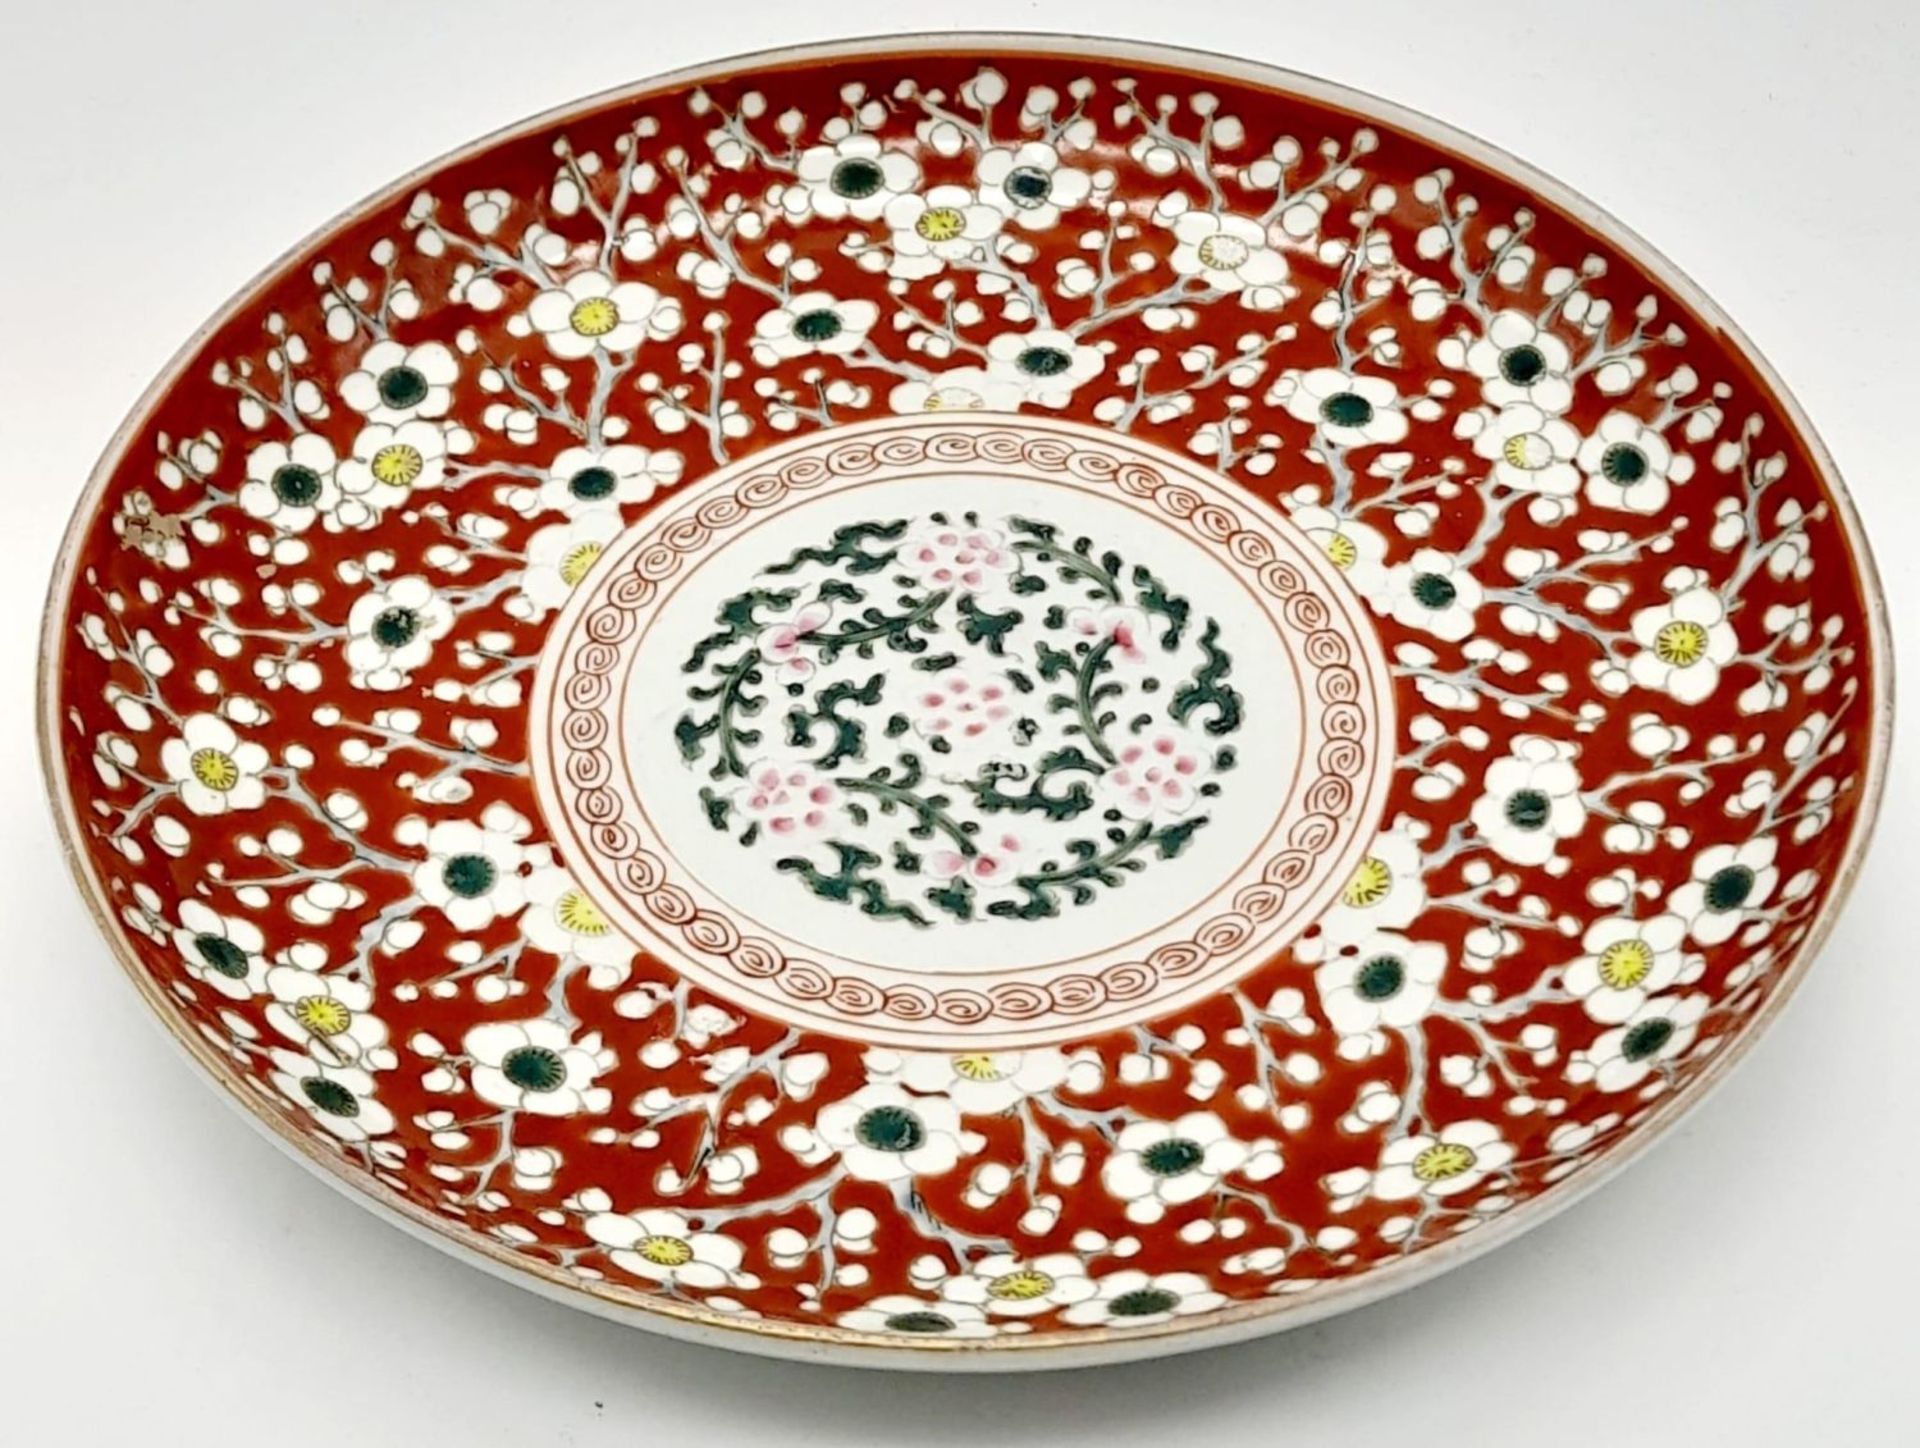 A Superb Antique (mid 19th century) Japanese Meiji Period Red Hawthorne Prunus Plate. Excellent - Image 2 of 4